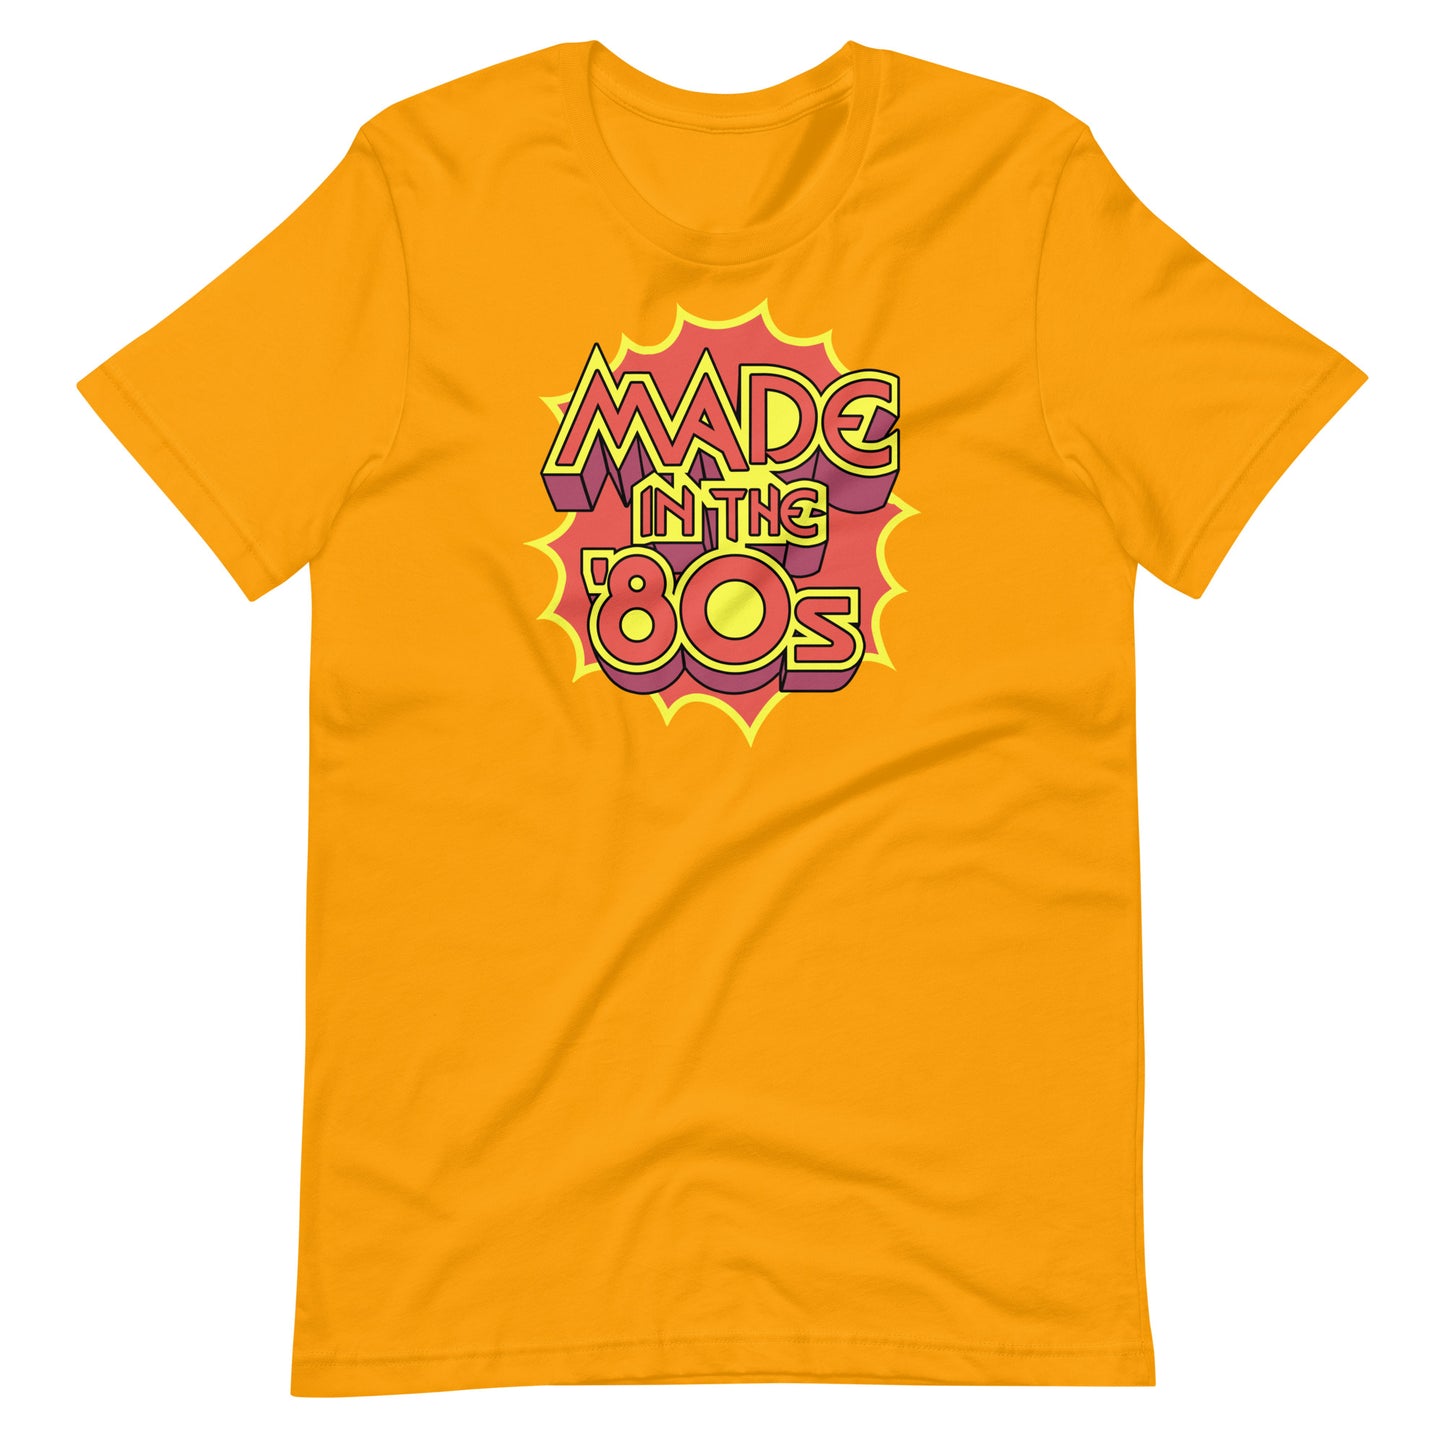 Made in the '80s PoP t-shirt